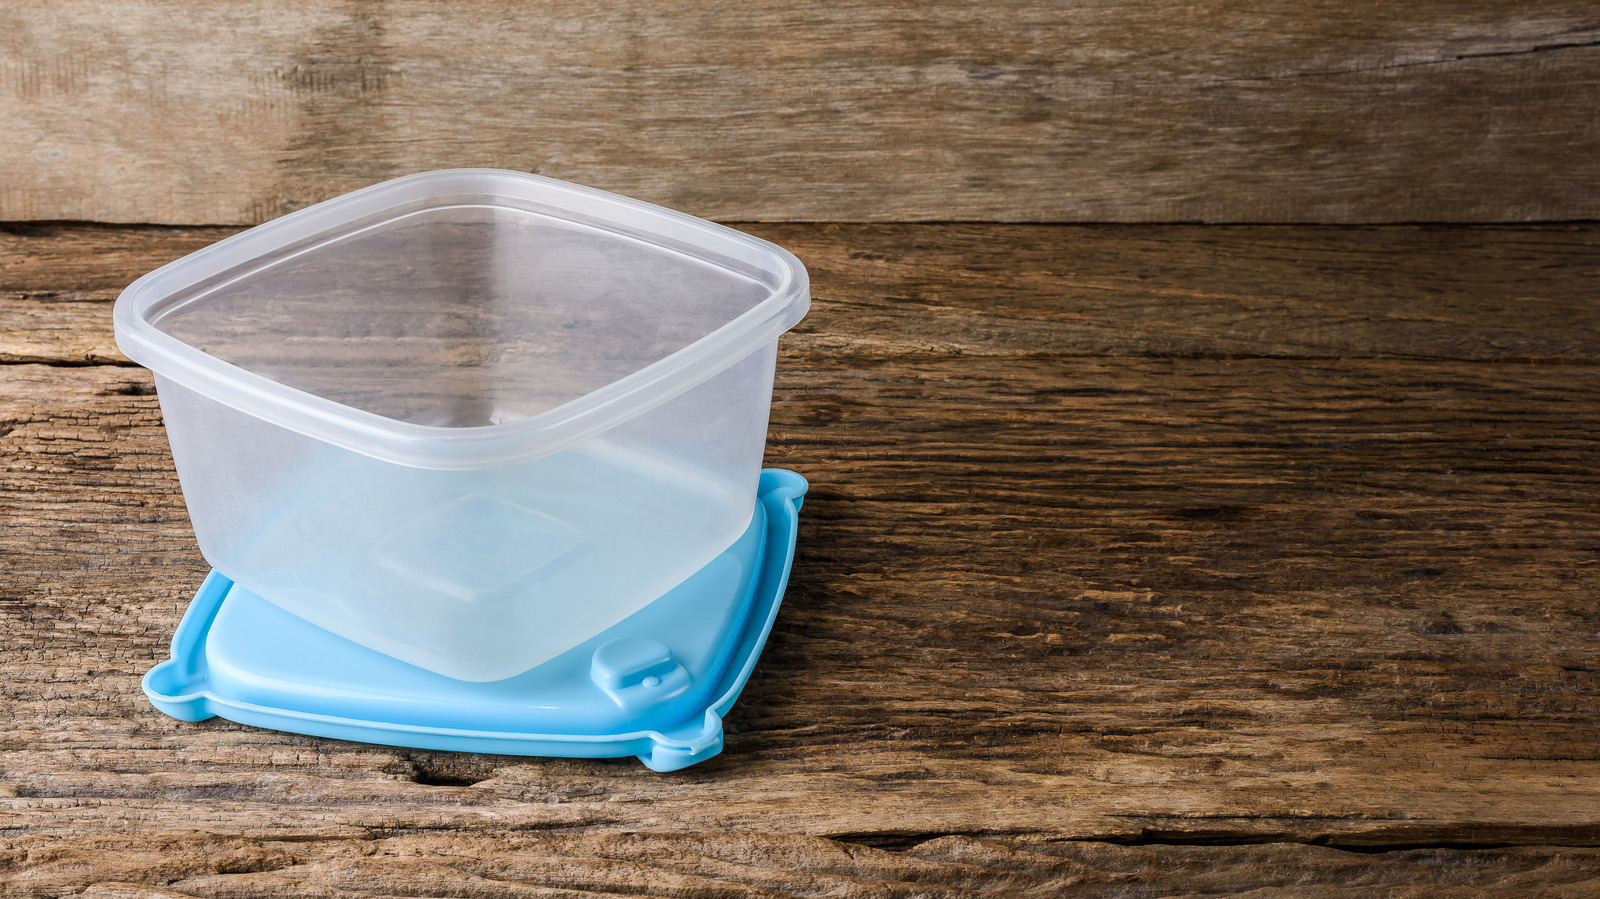 SOLVED: The Mystery of the Missing Tupperware Lids